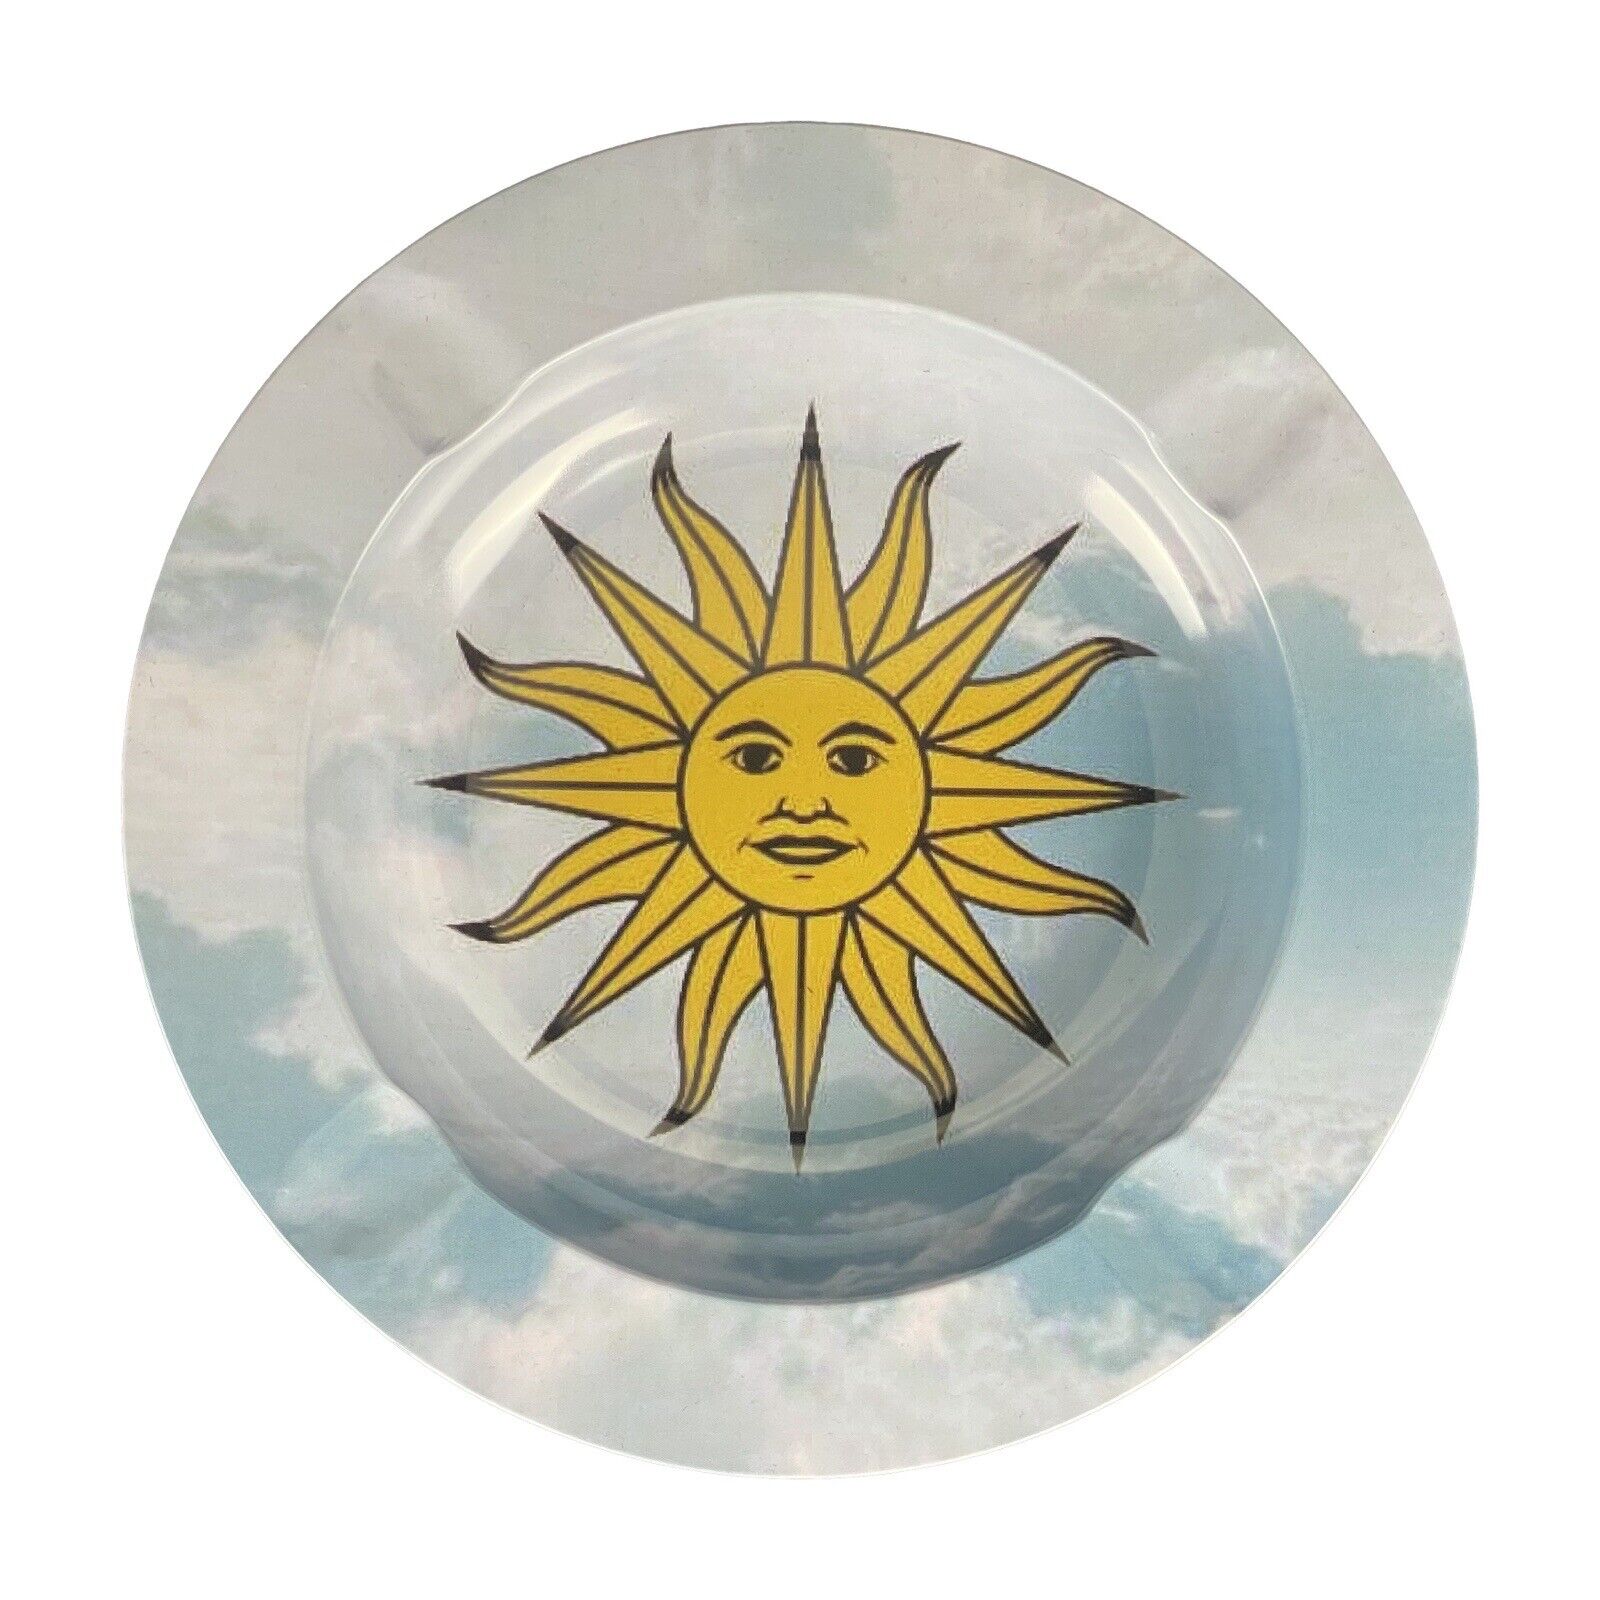 Ashtray “Sun Face in Clouds” 5.5” Circle Metal Tray Tobacco Smoke Accessories